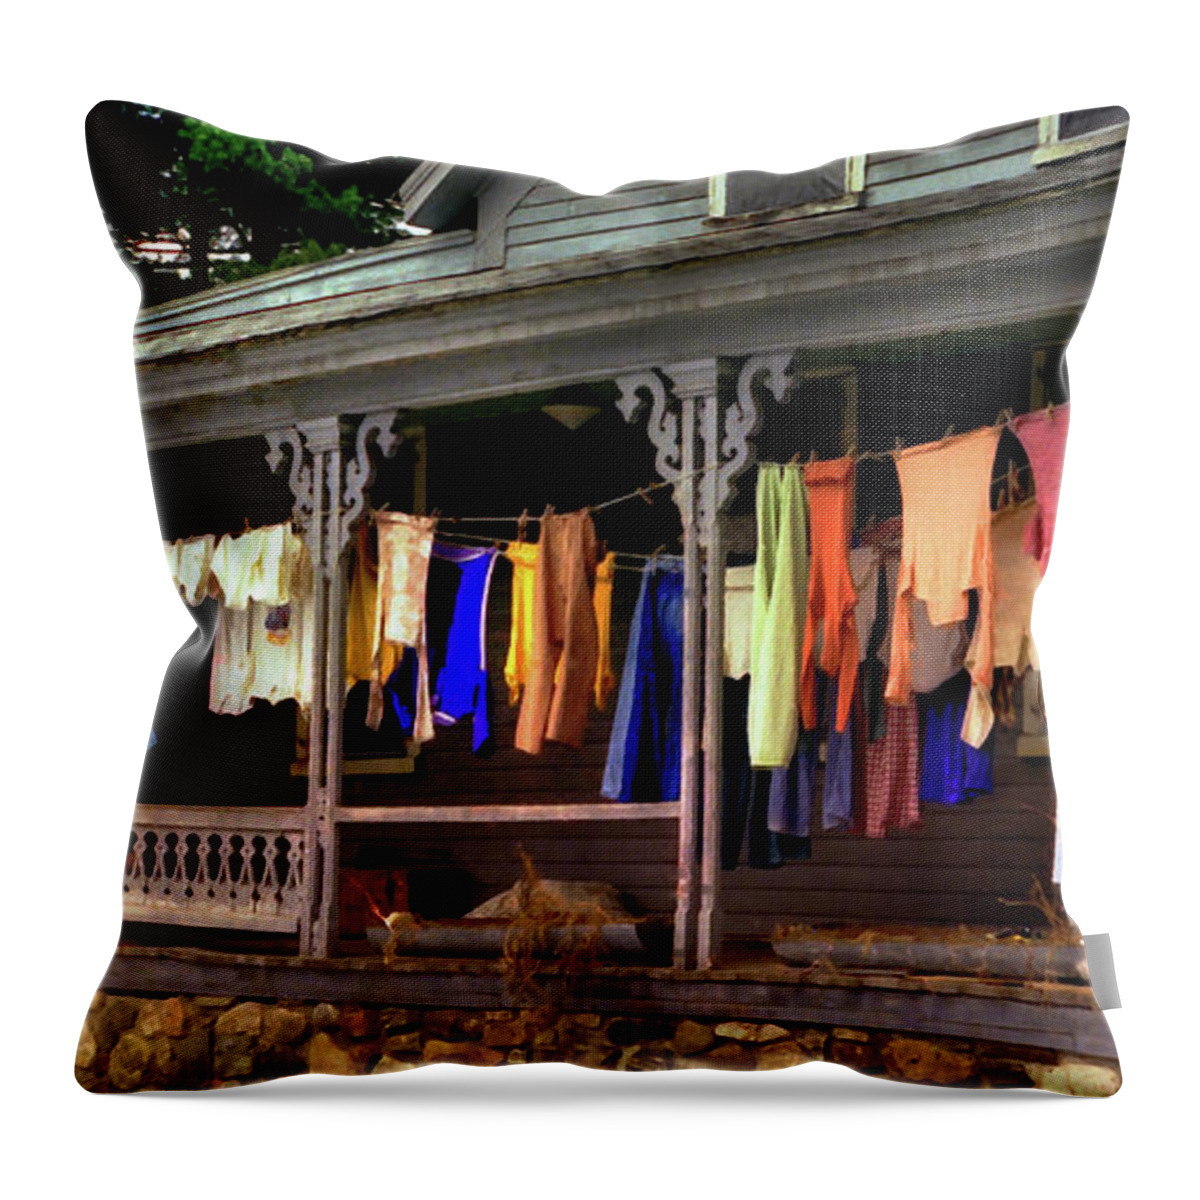 Alton Throw Pillow featuring the photograph Alton Washday Revisited by Wayne King